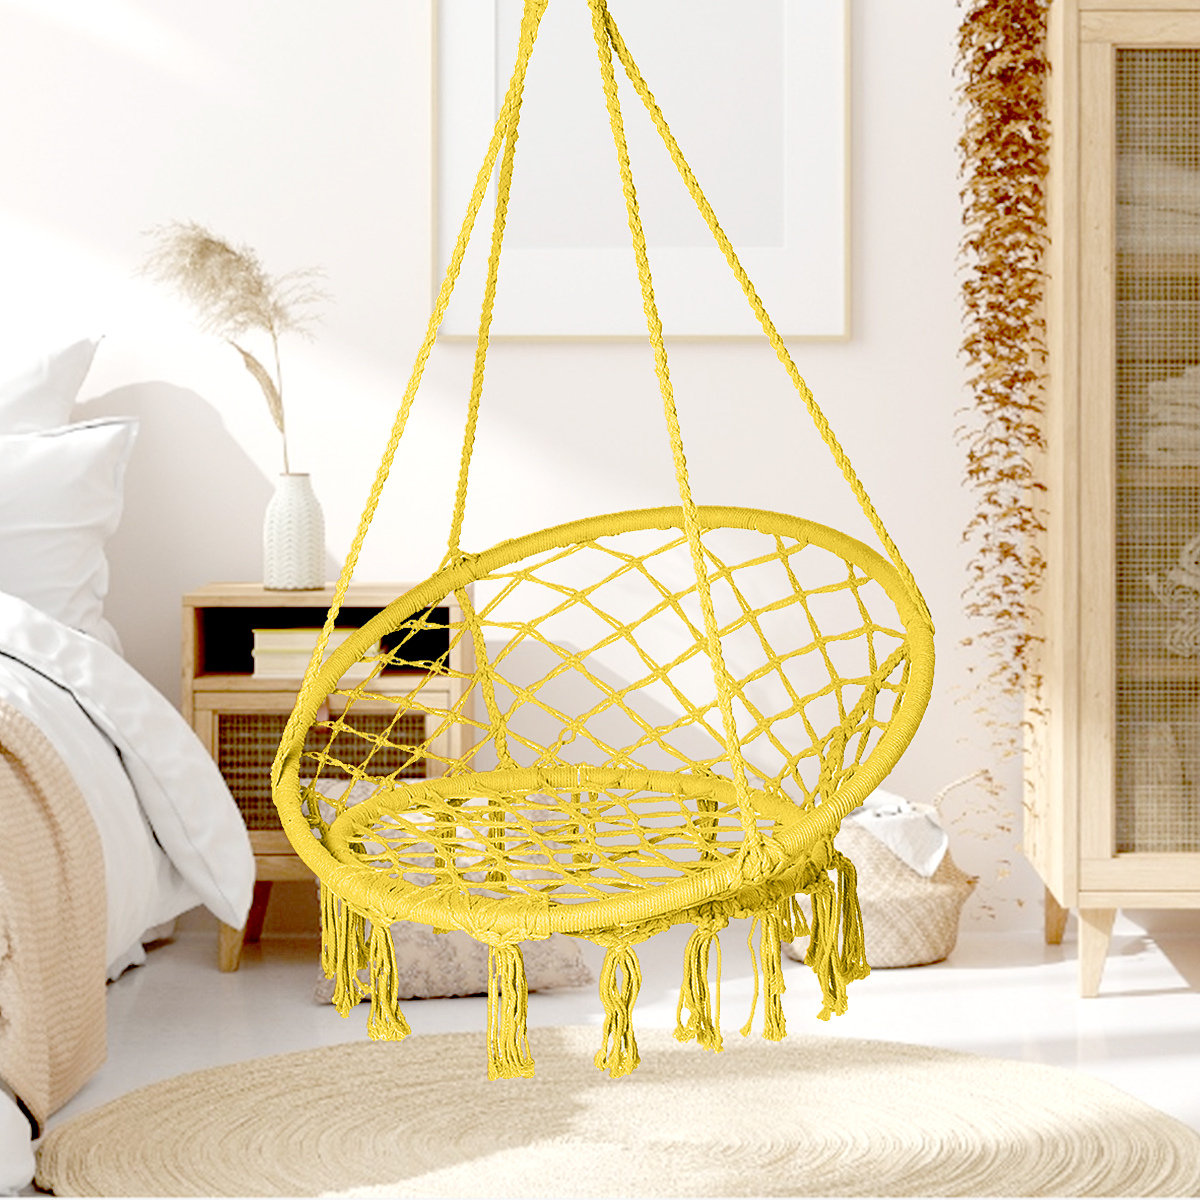 Hammock Chair with Fringe Tassels,Exquisite Dreamy Round Hanging Chair,Cotton Rope Macrame Swing Chairs for Indoor/Outdoor Bedroom Patio Deck or Garden,Handwoven Hammock Hanging Chair Swing - image 3 of 4